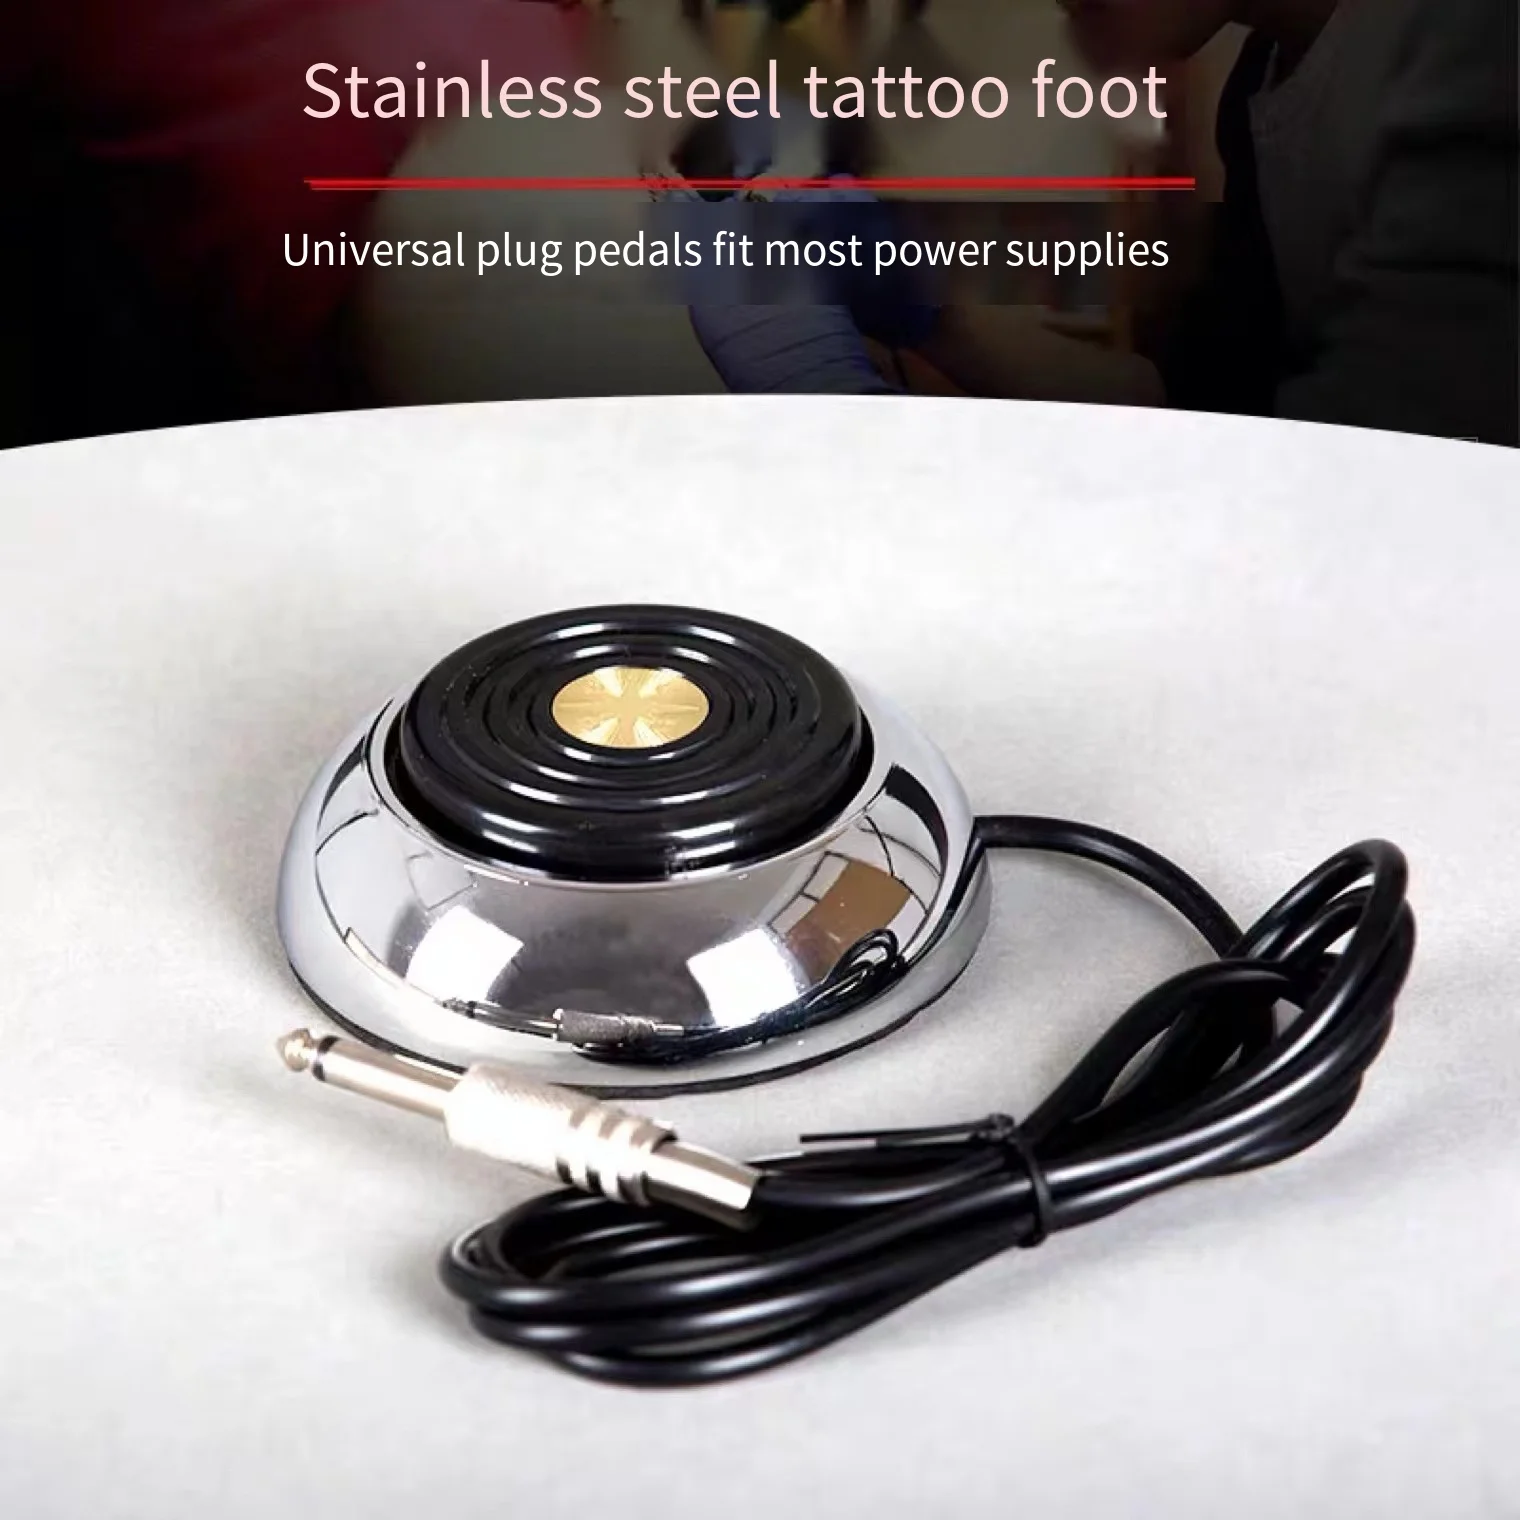 360° Tattoo Foot Pedal Multi-Angle Weighted Tattoo Machine Power Supply Pedal Switch Tattoo Equipment Voltage Regulator Makeup gym bounce training pedal multi functional gymnastics bench exercise physical training equipment progressive jump box